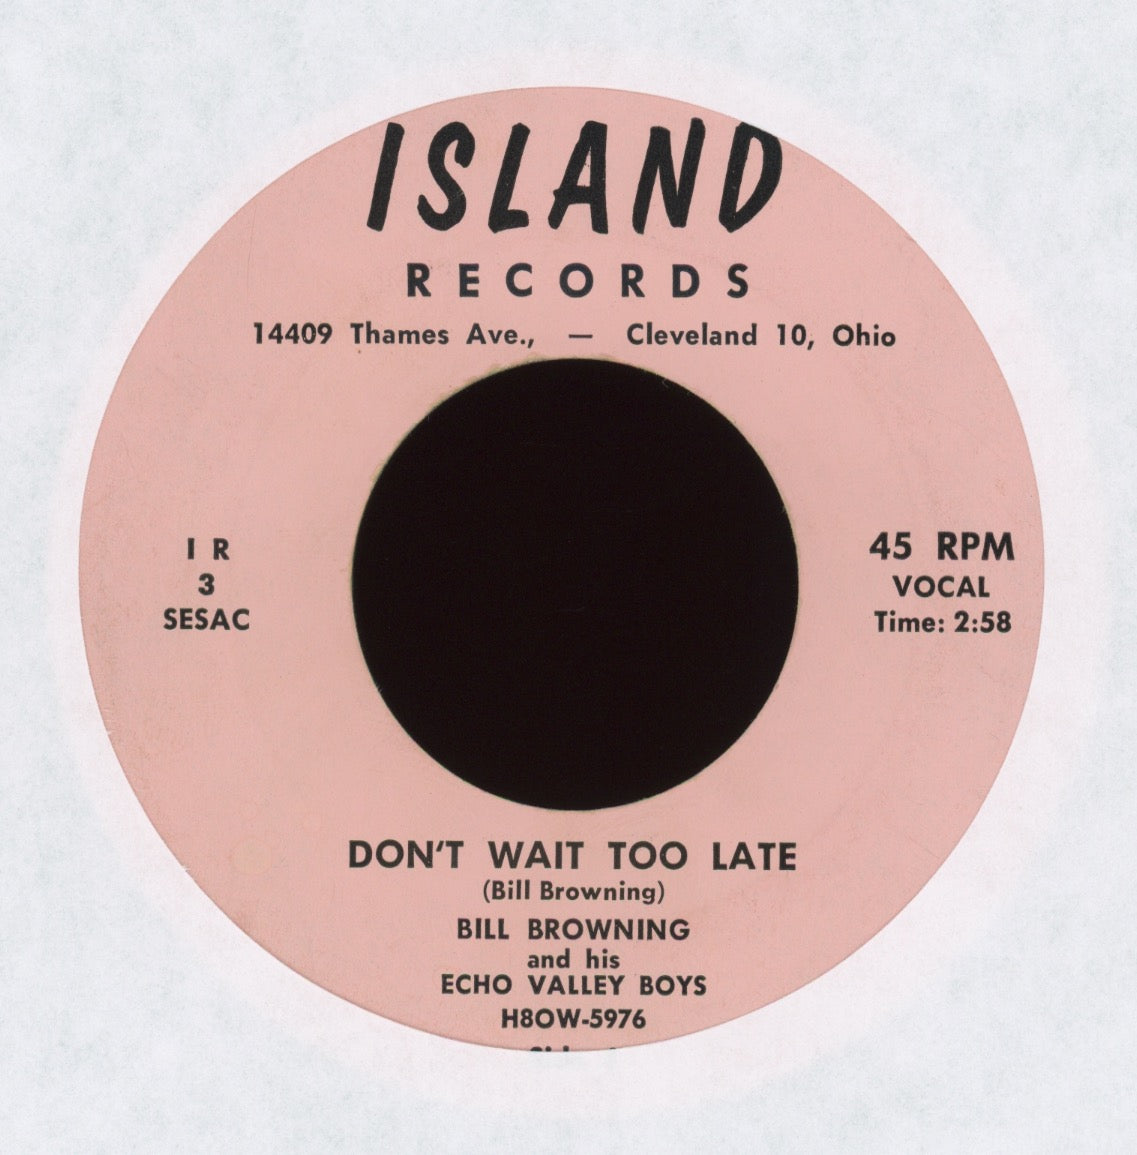 Bill Browning - Don't Wait Too Late on Island